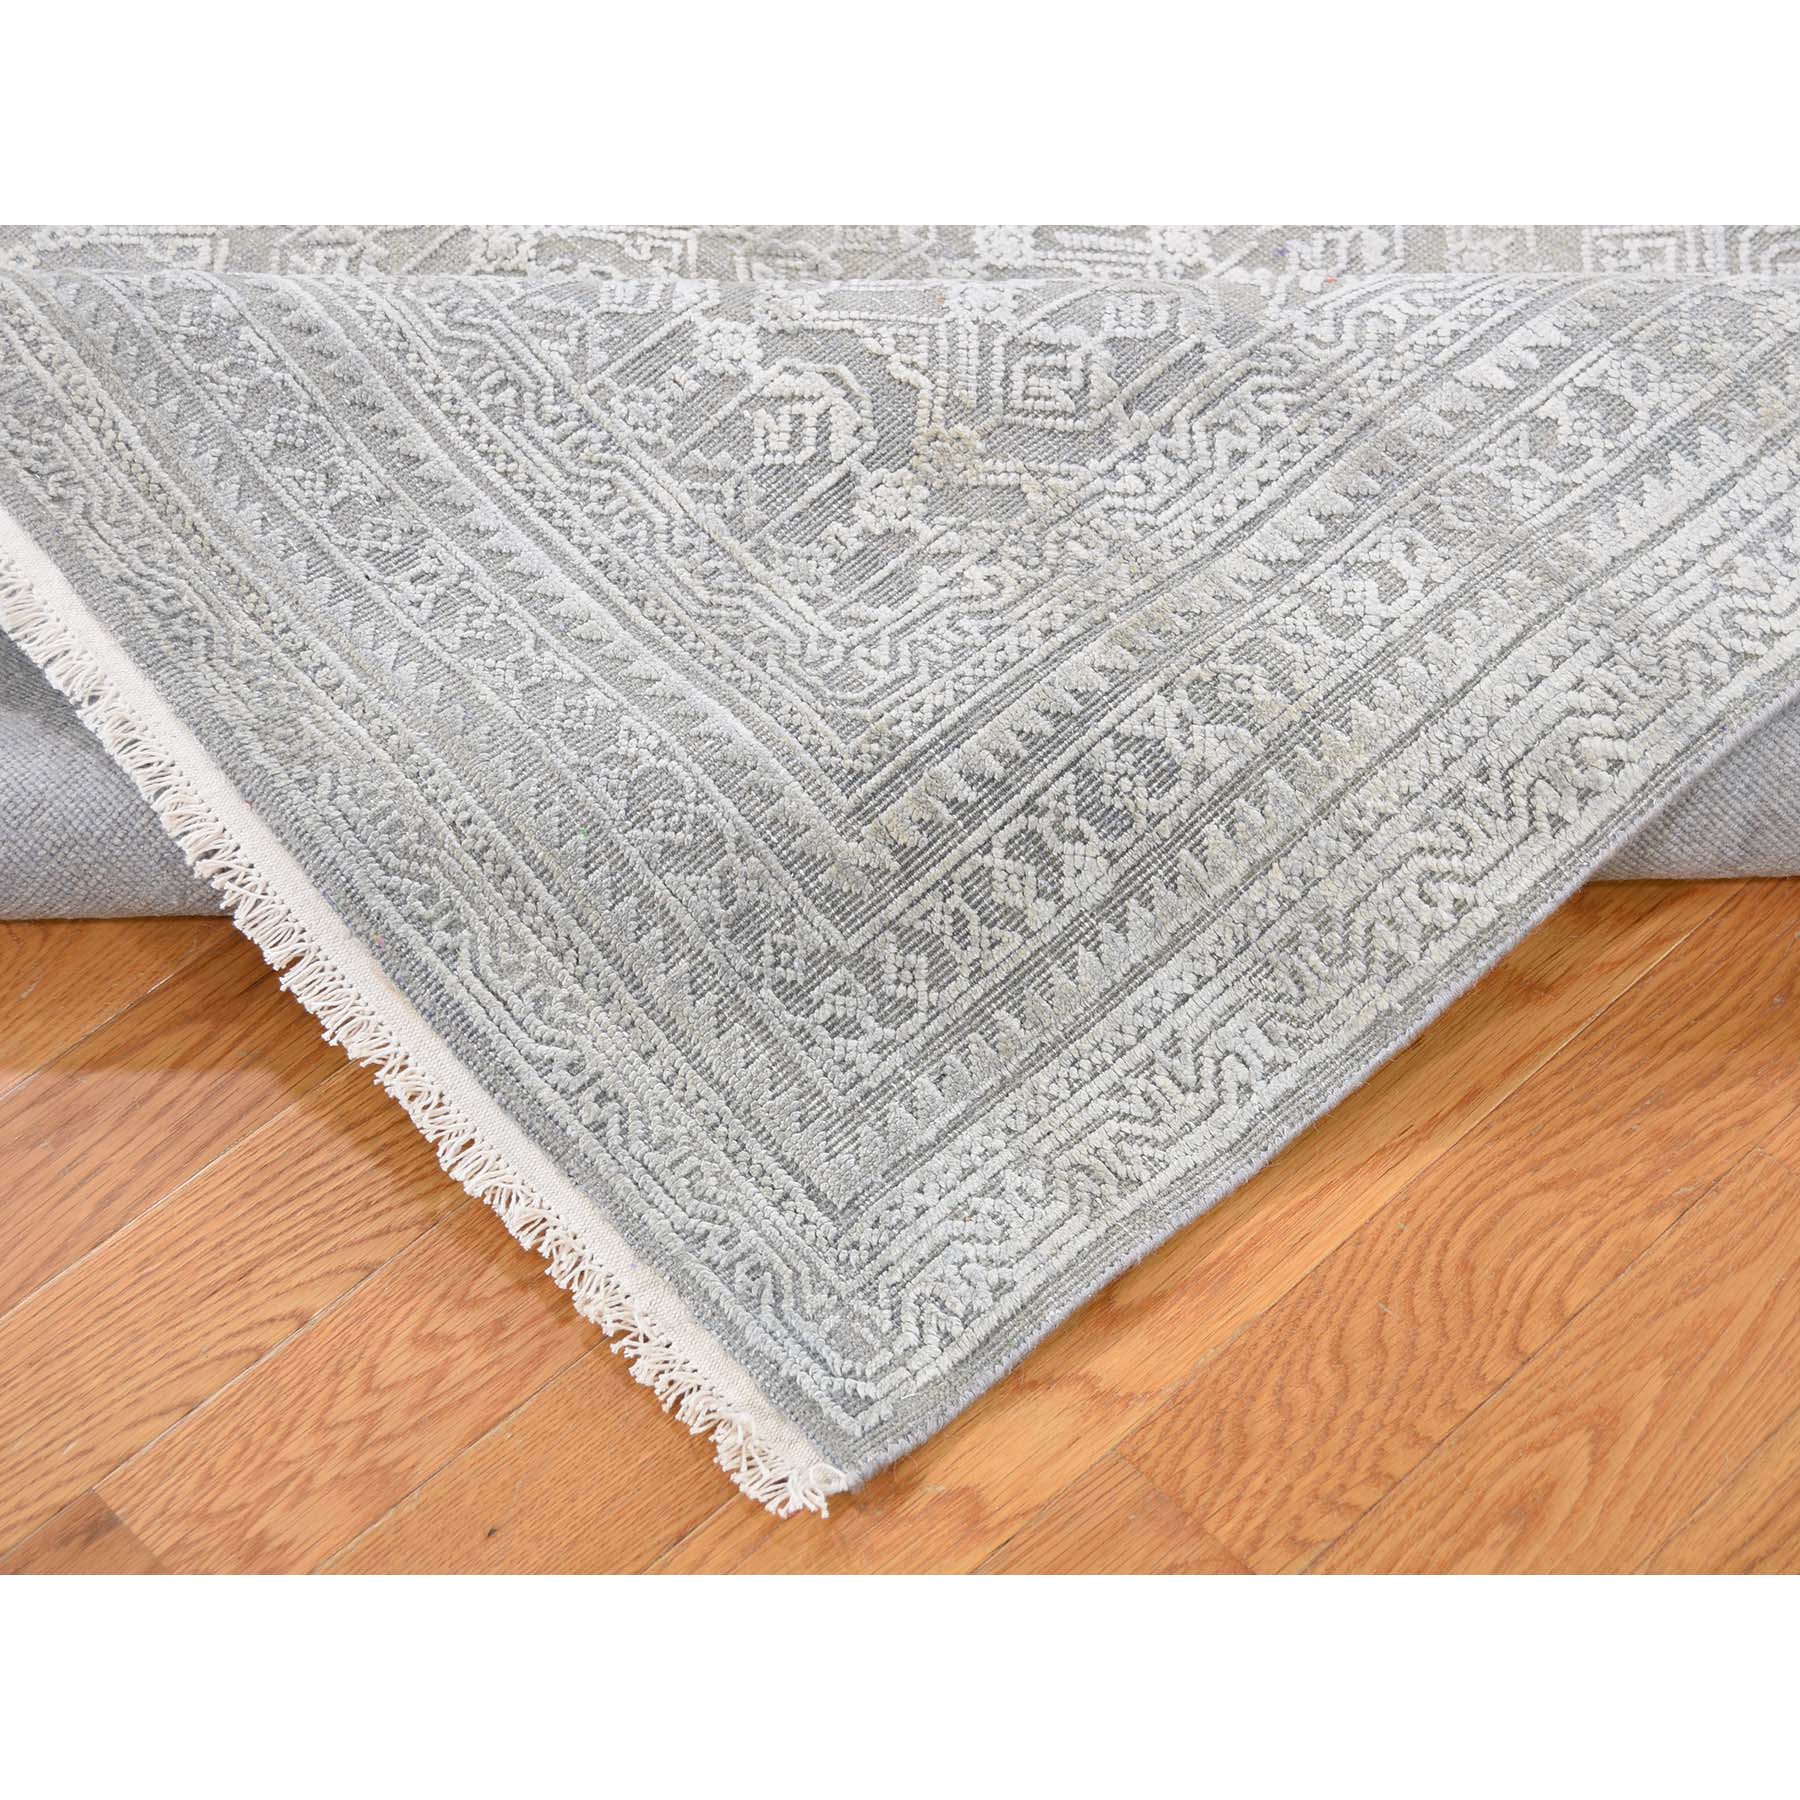 6-x9-1  Pure Silk Oxidized Wool Tone On Tone Hand-Knotted Oriental Rug 